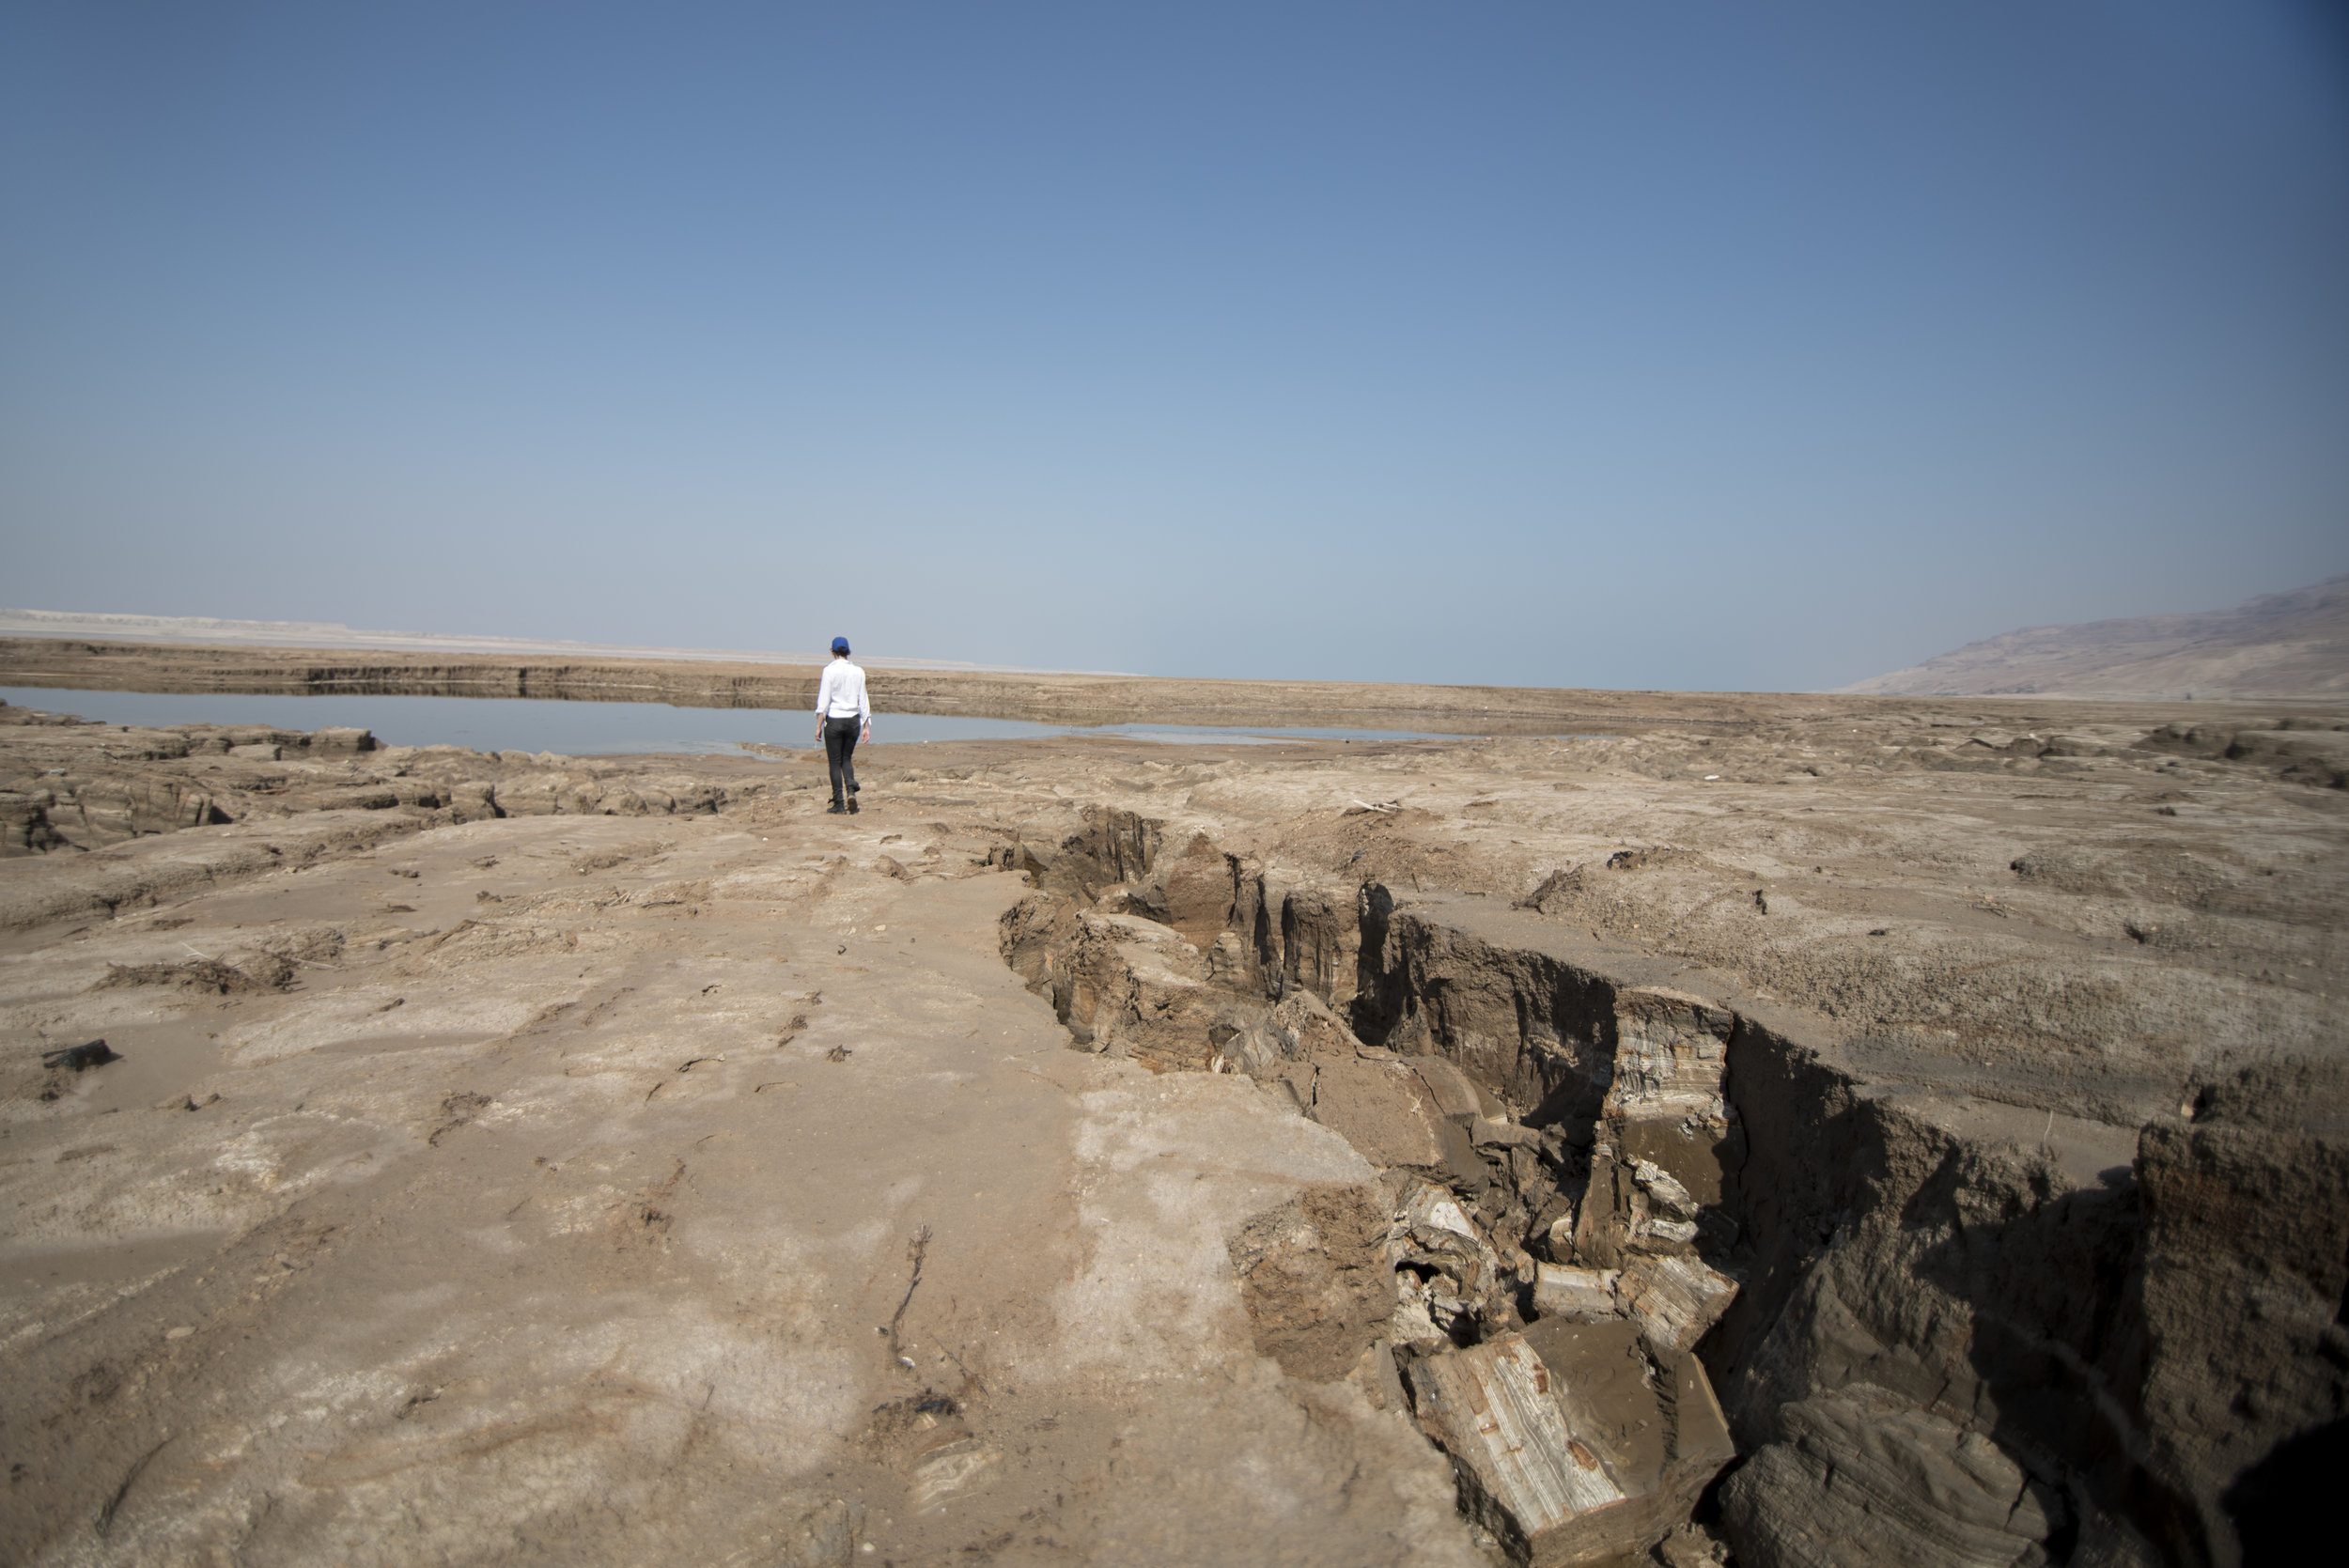 Cracks and mile-wide sinkholes still partially filled with water dot the landscape where once the Dead Sea used to be.